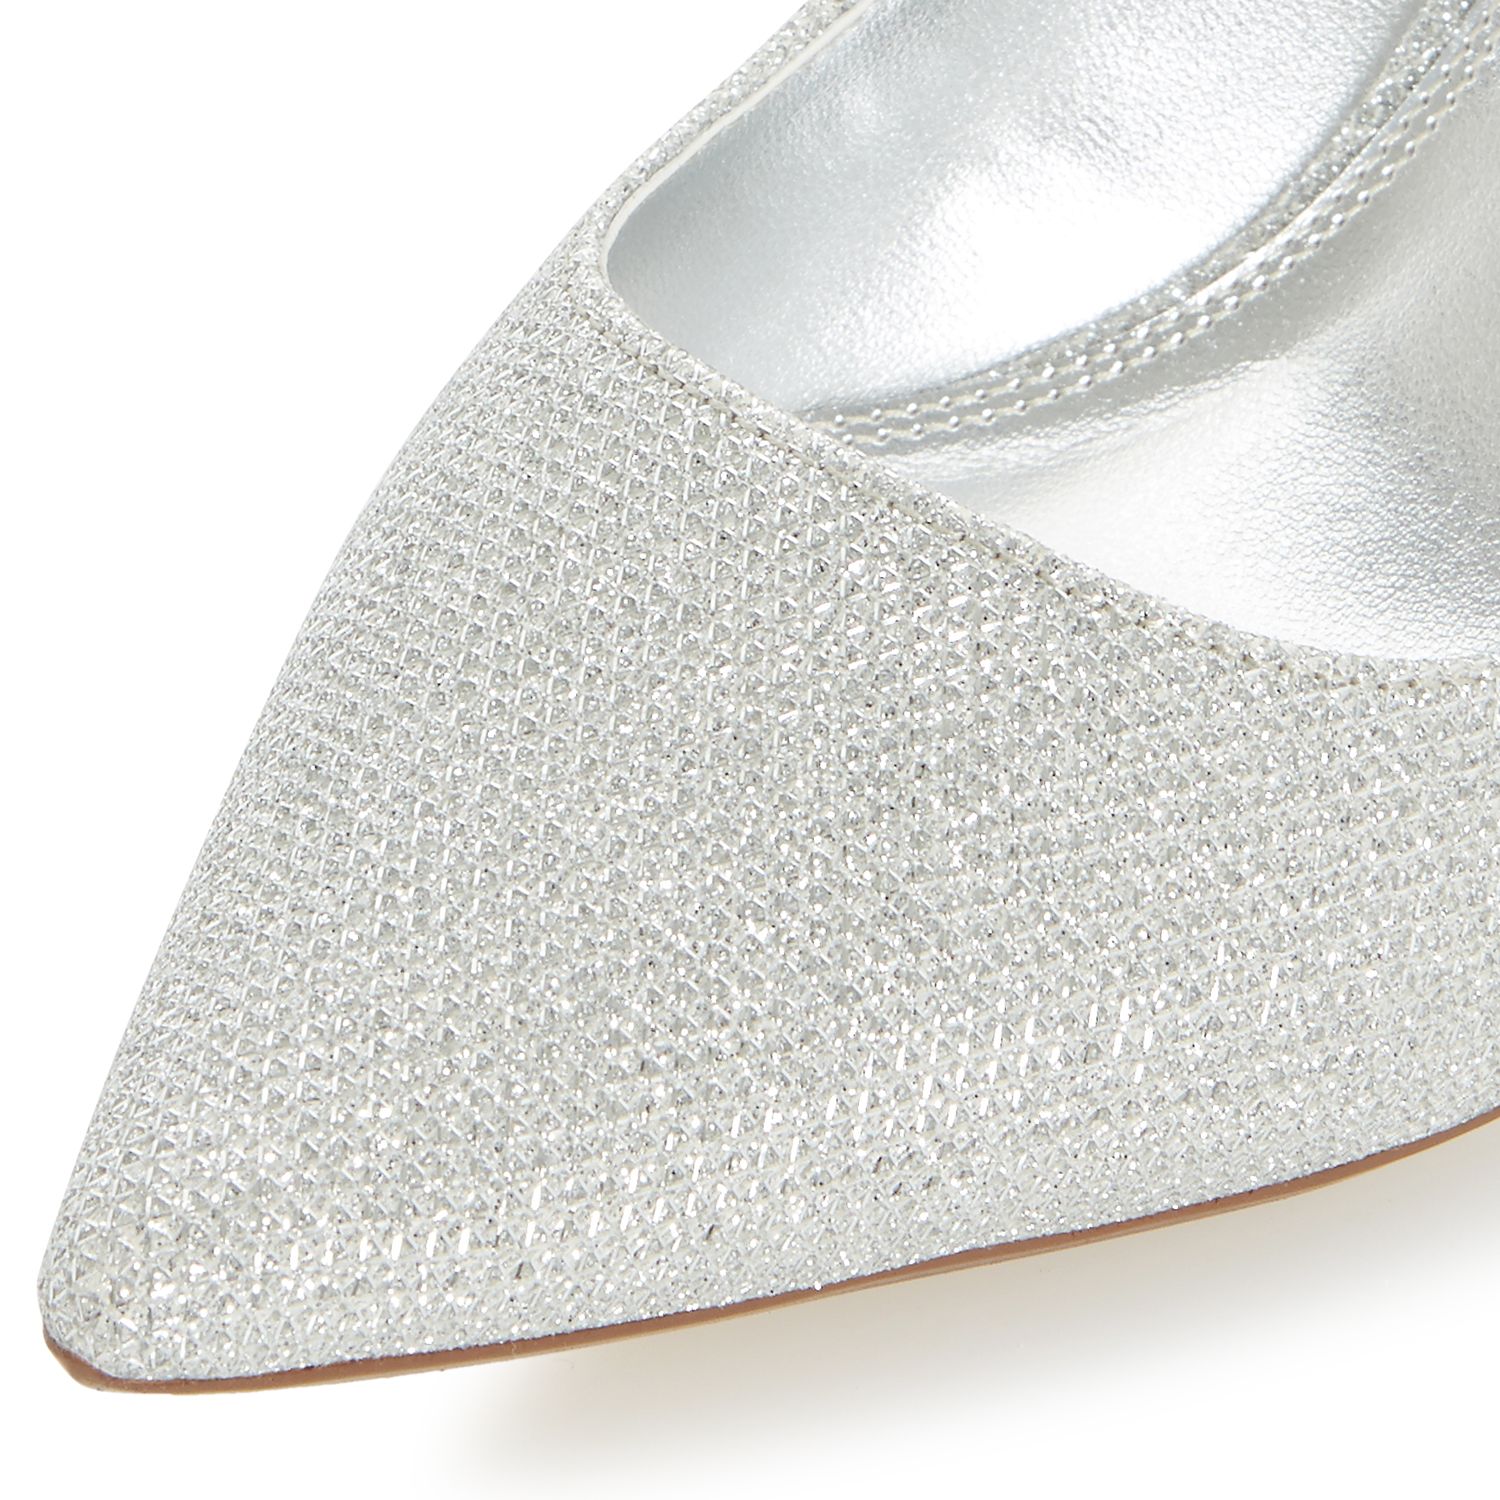 Dune Allera Mid Heeled Stiletto Court Shoes, Silver